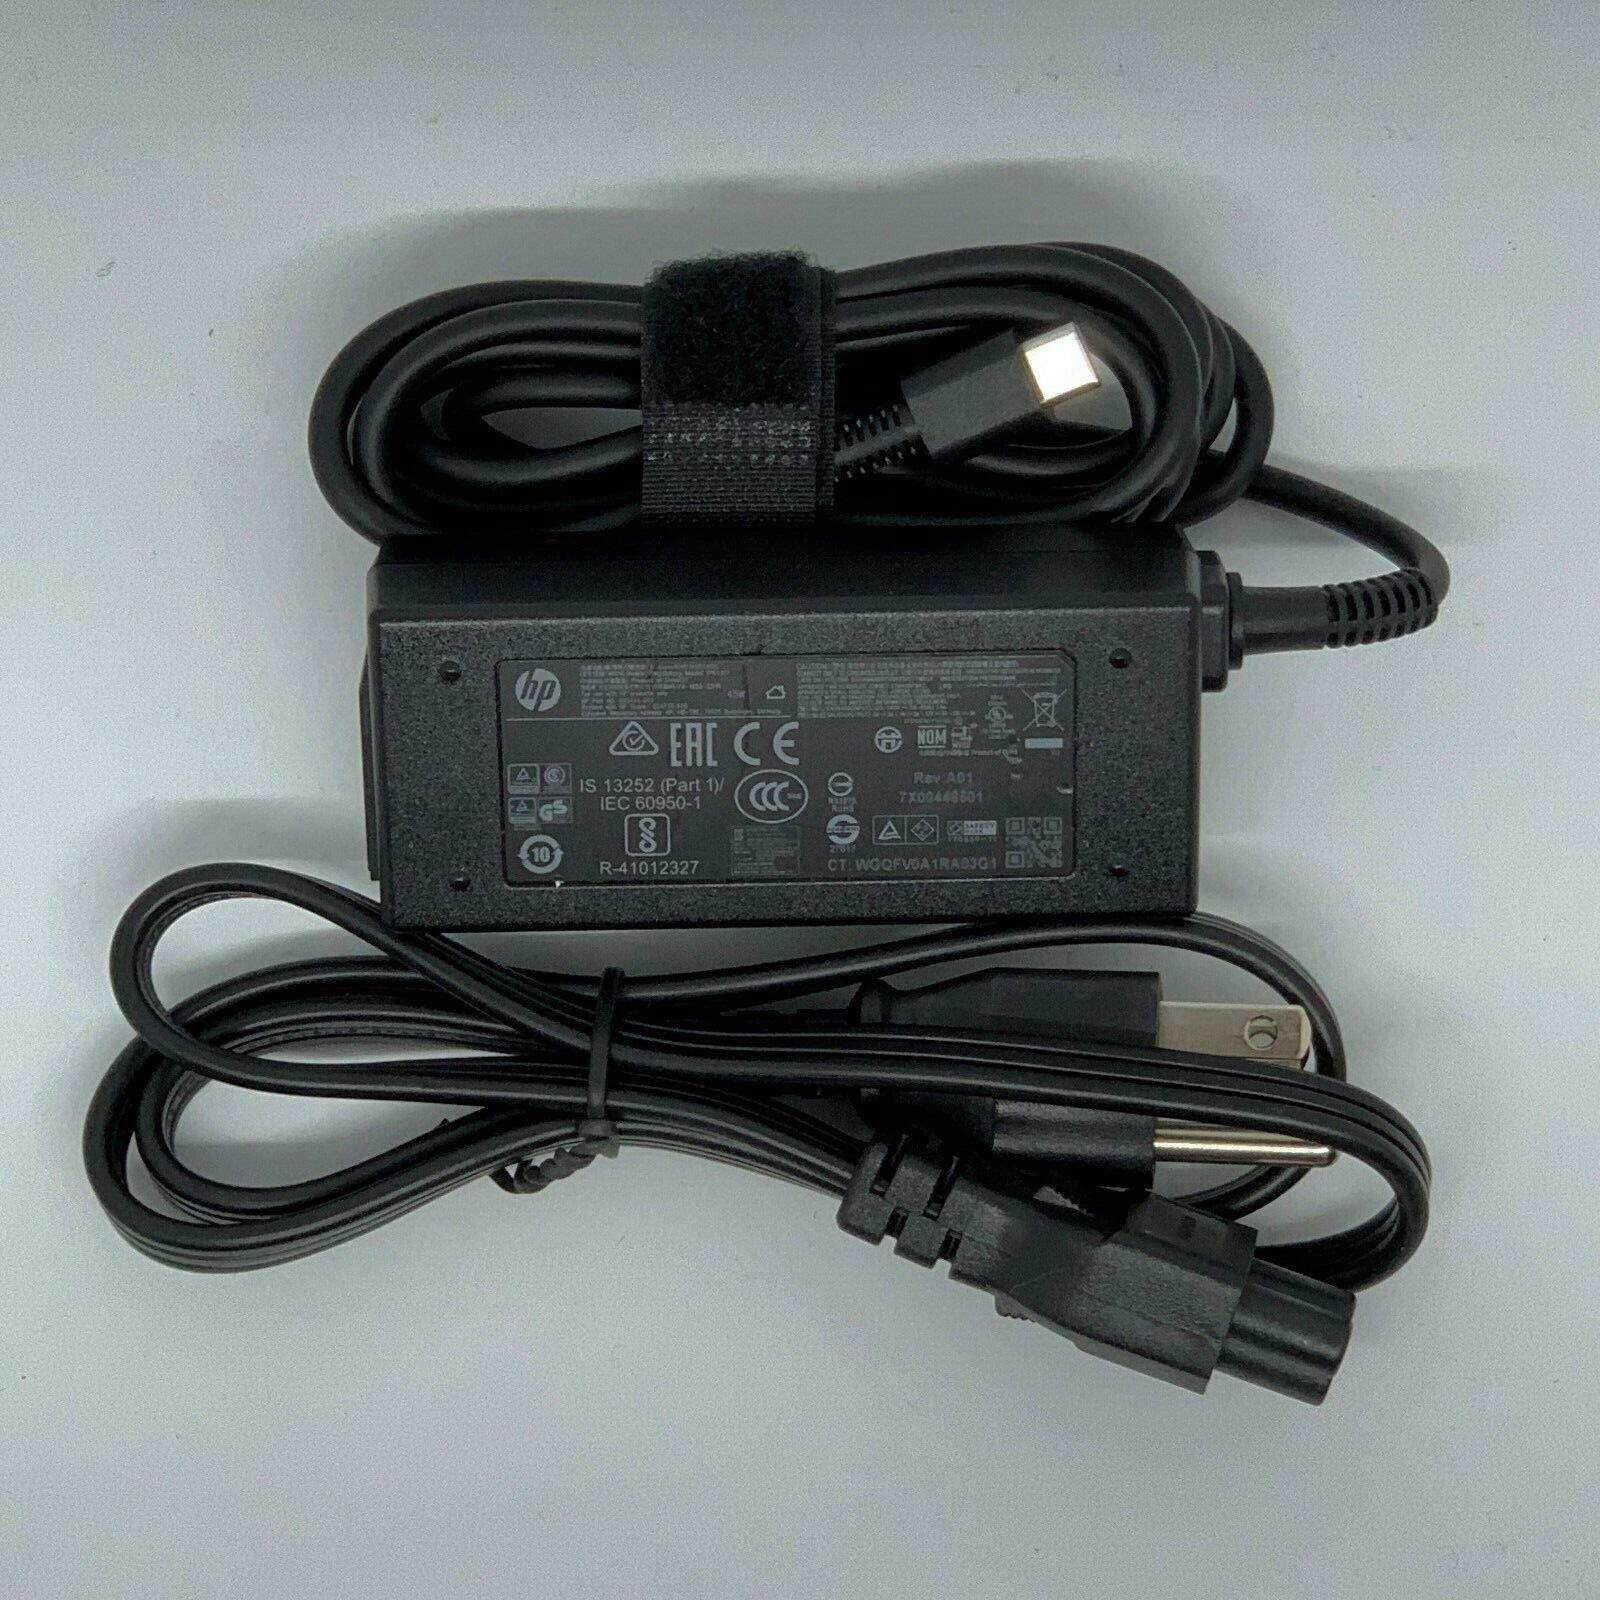 L43407-001 934739-850 Genuine 45w Type-C Power Adapter Charger for HP Chromebook